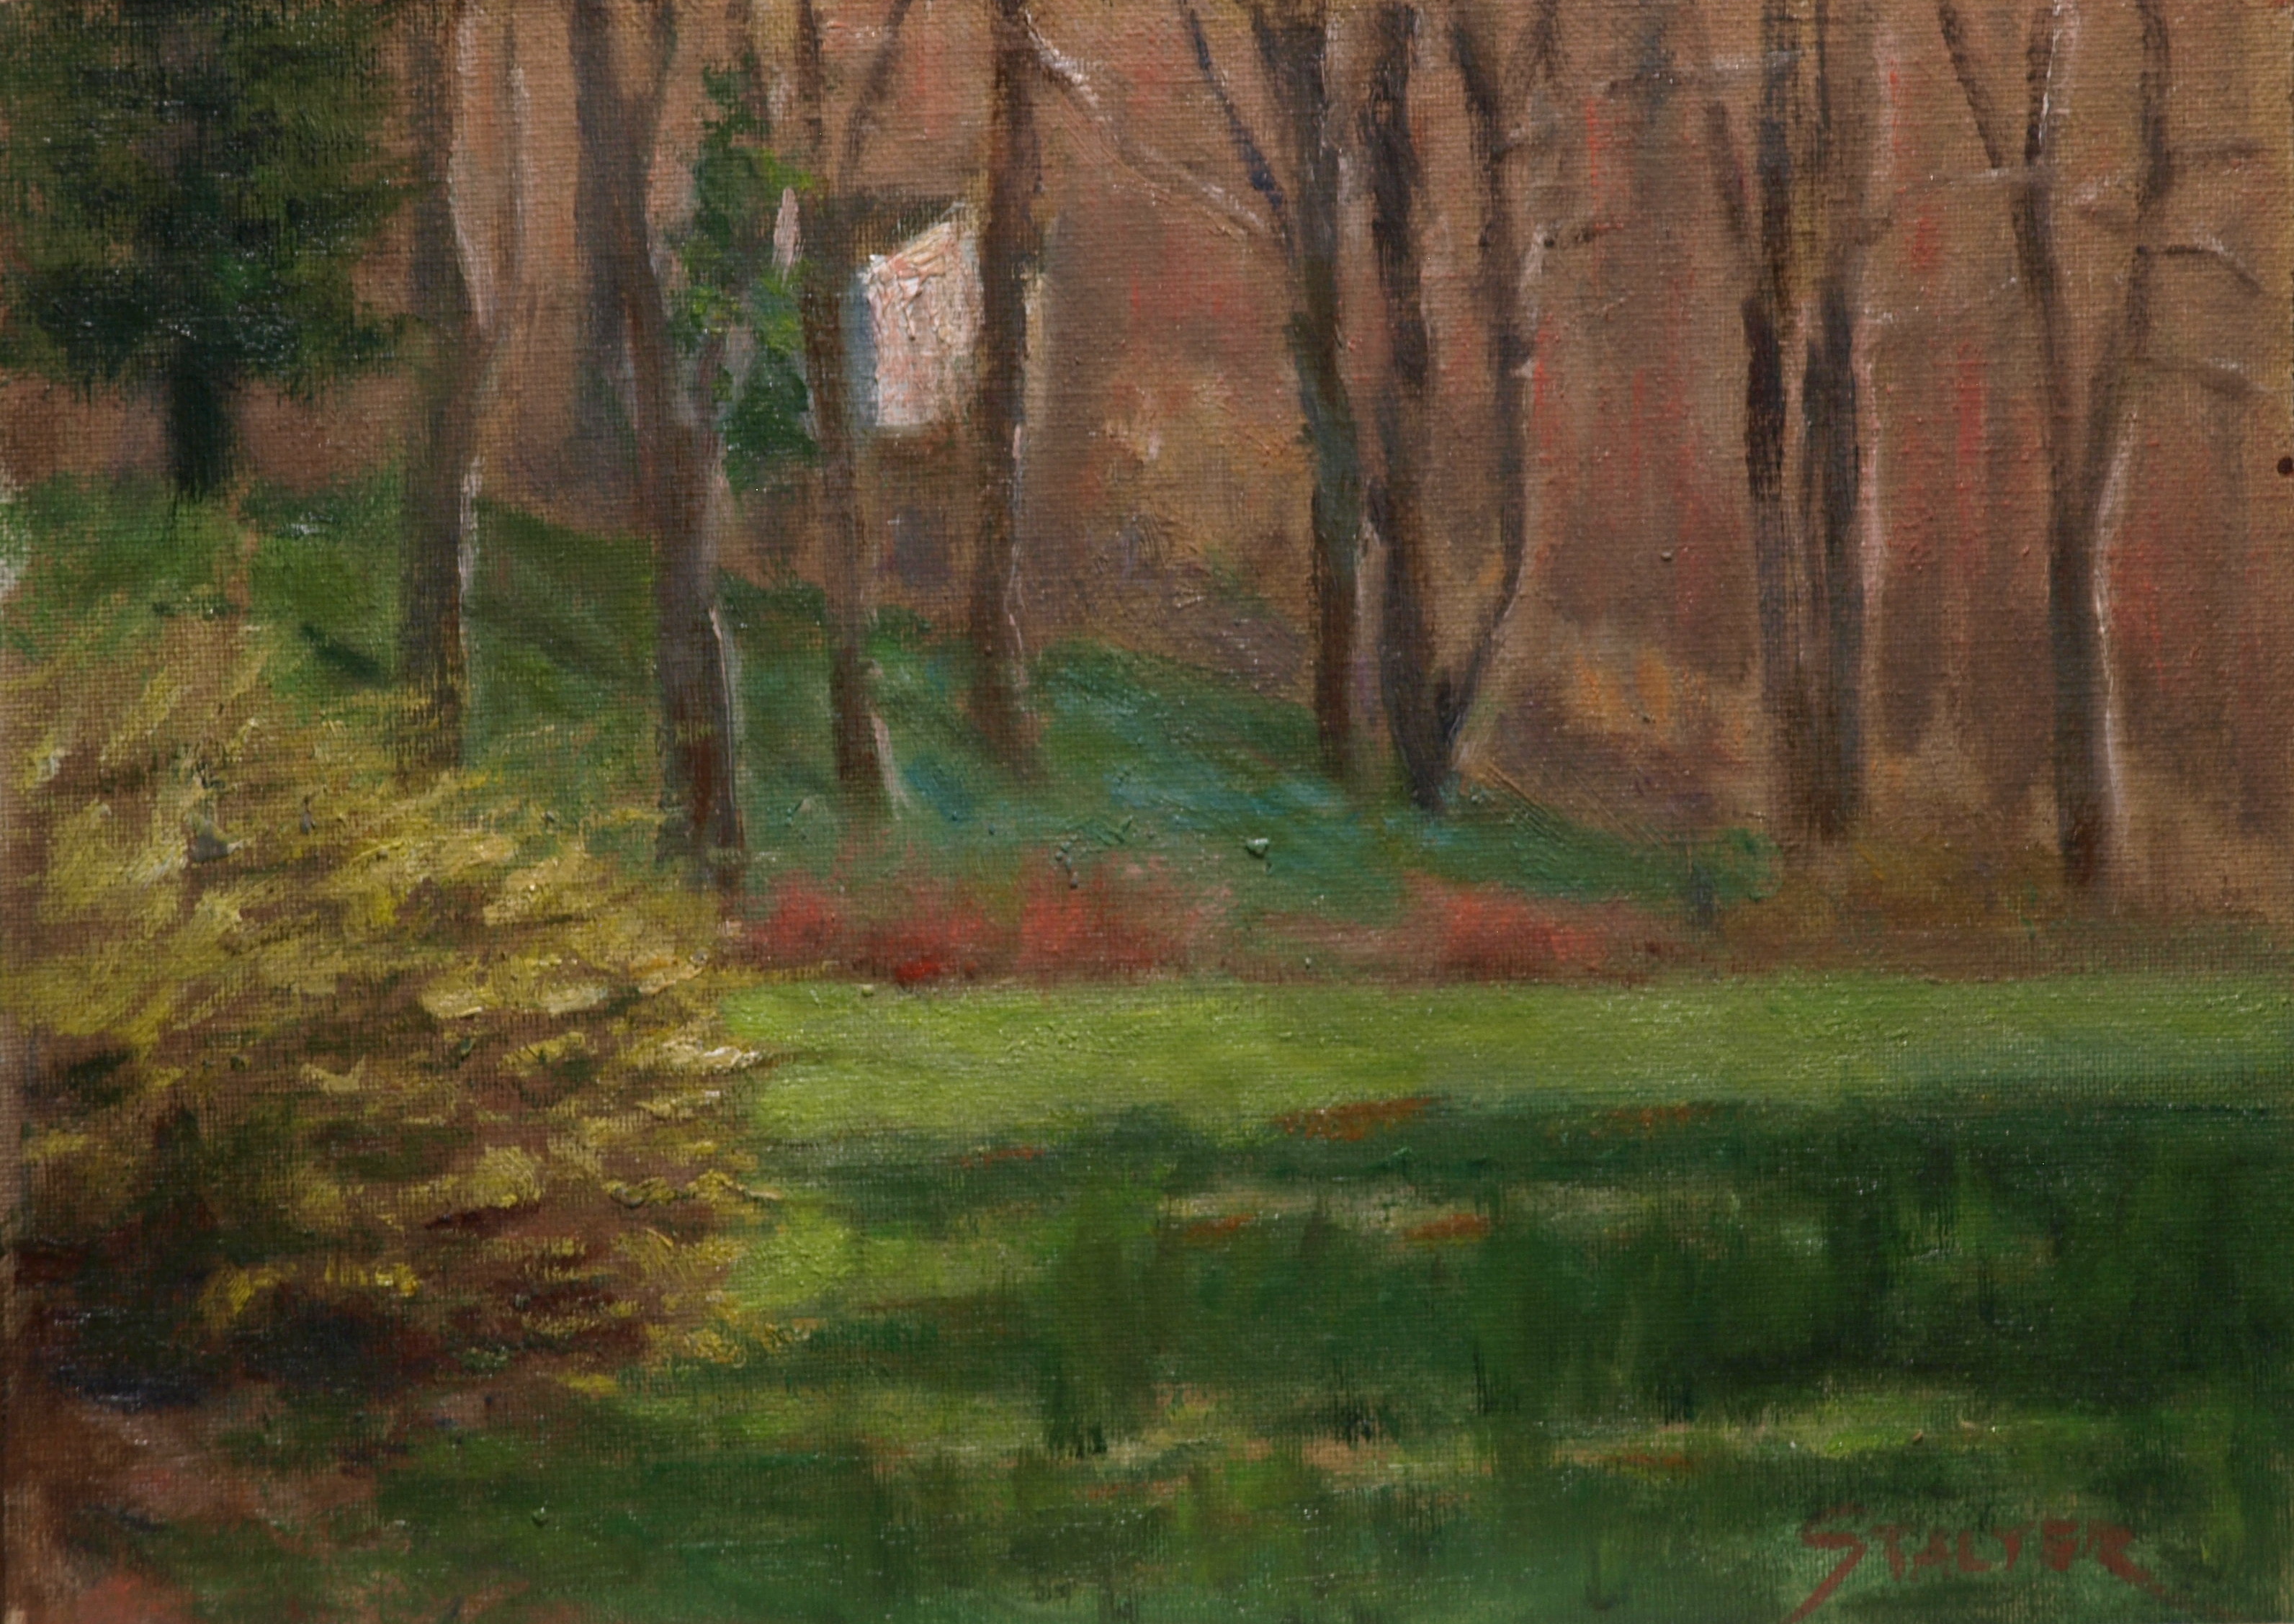 Forsythia Time, Oil on Canvas on Panel, 9 x 12 Inches, by Richard Stalter, $225